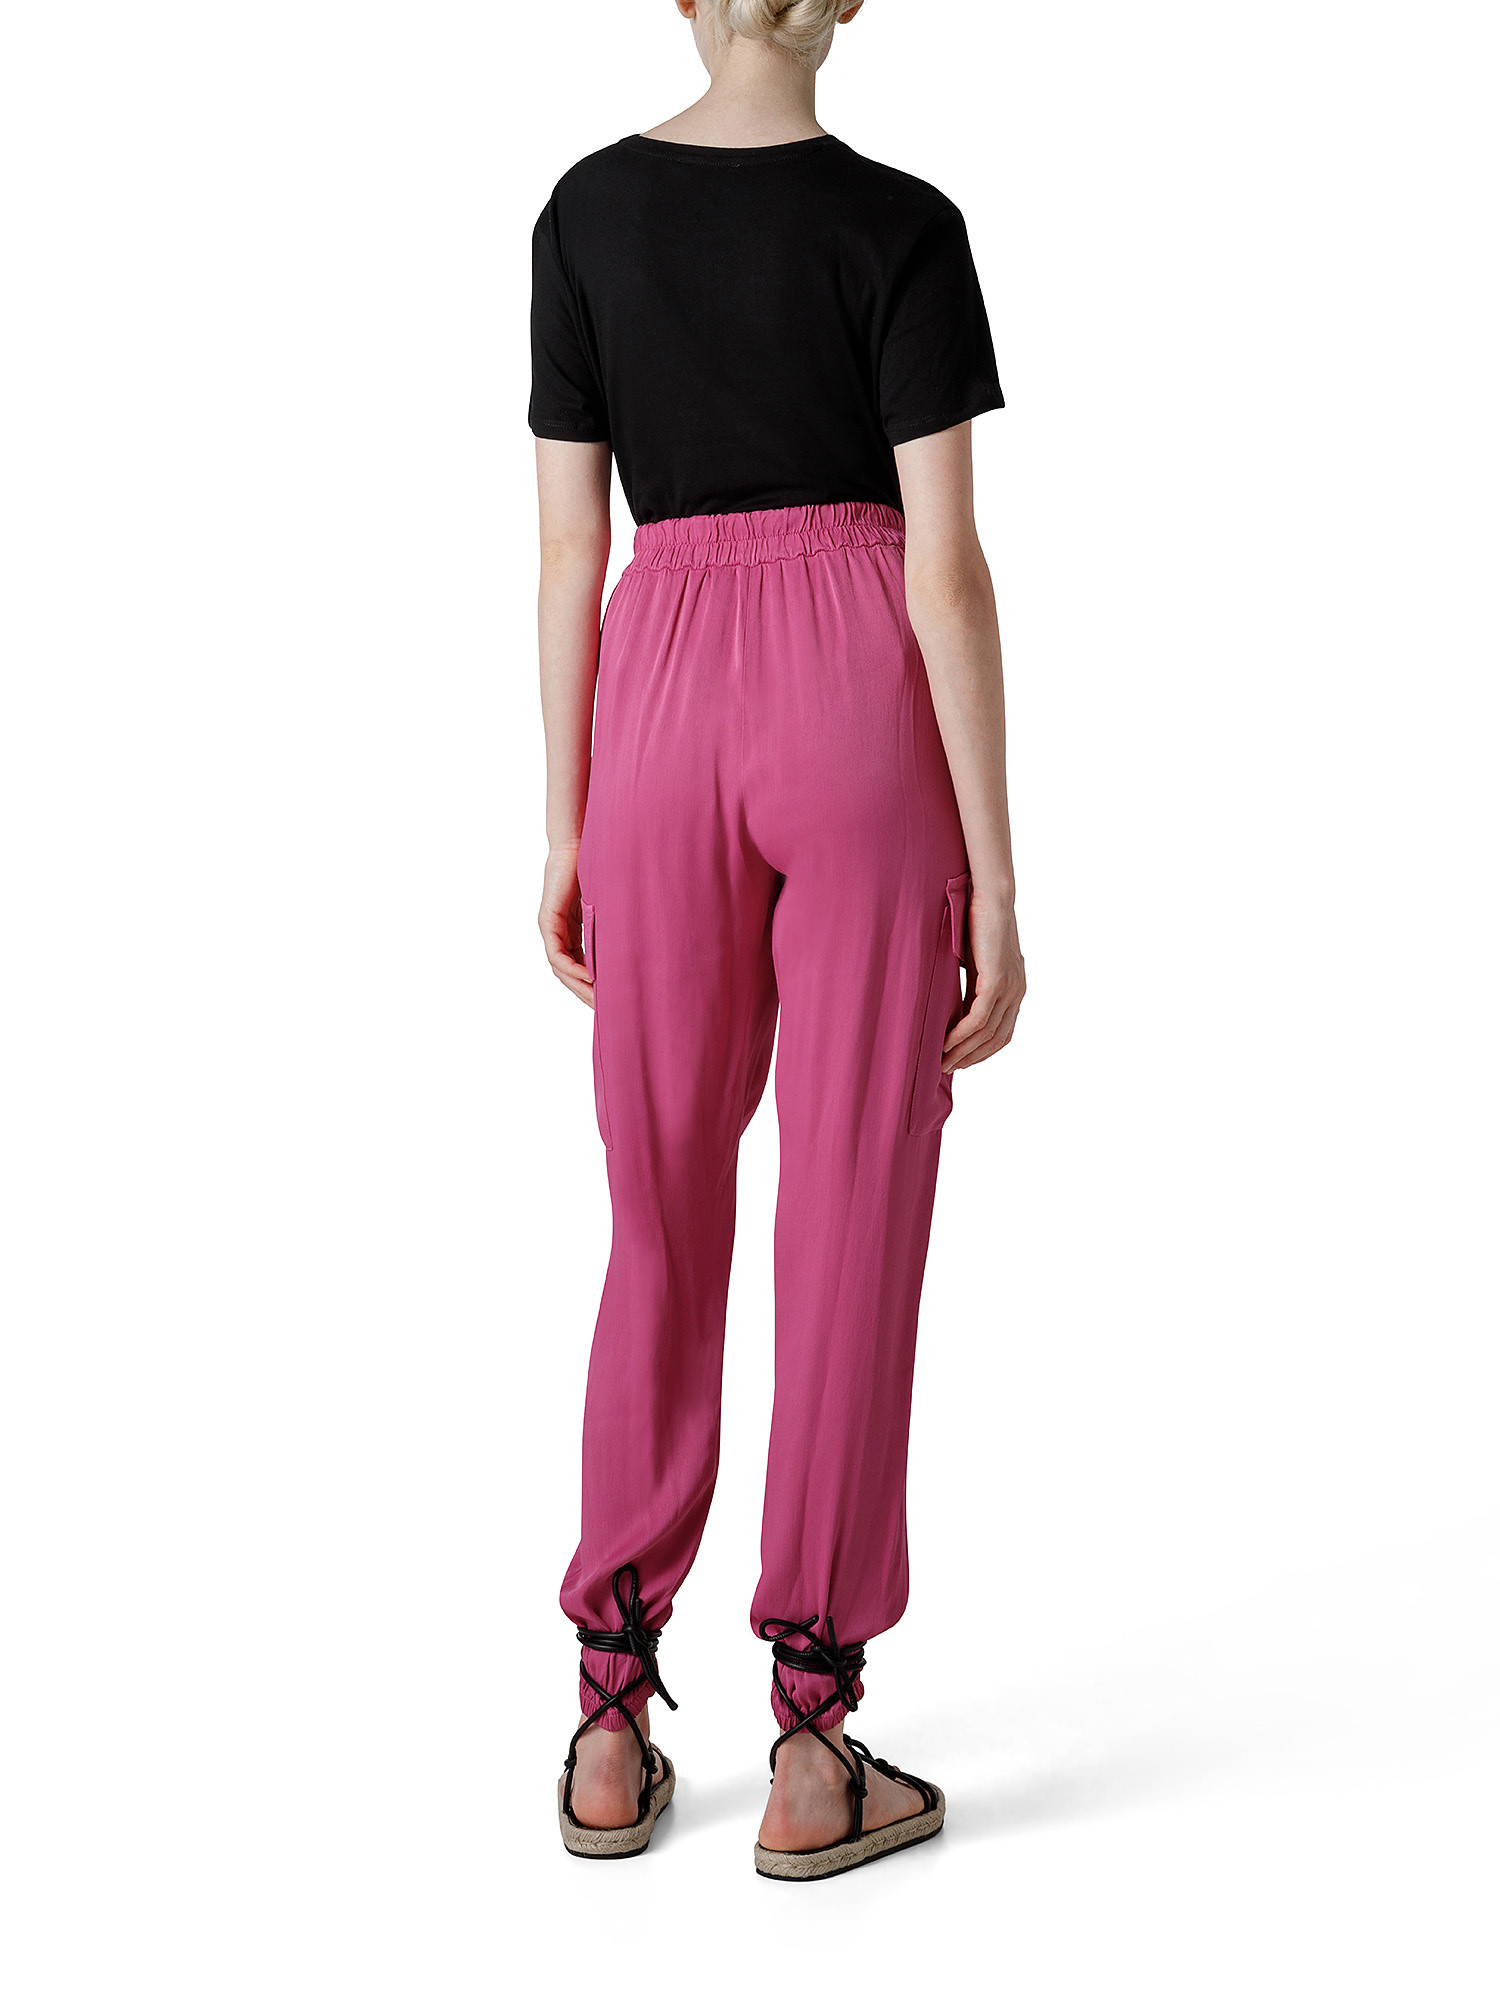 Cargo trousers, Pink Fuchsia, large image number 3